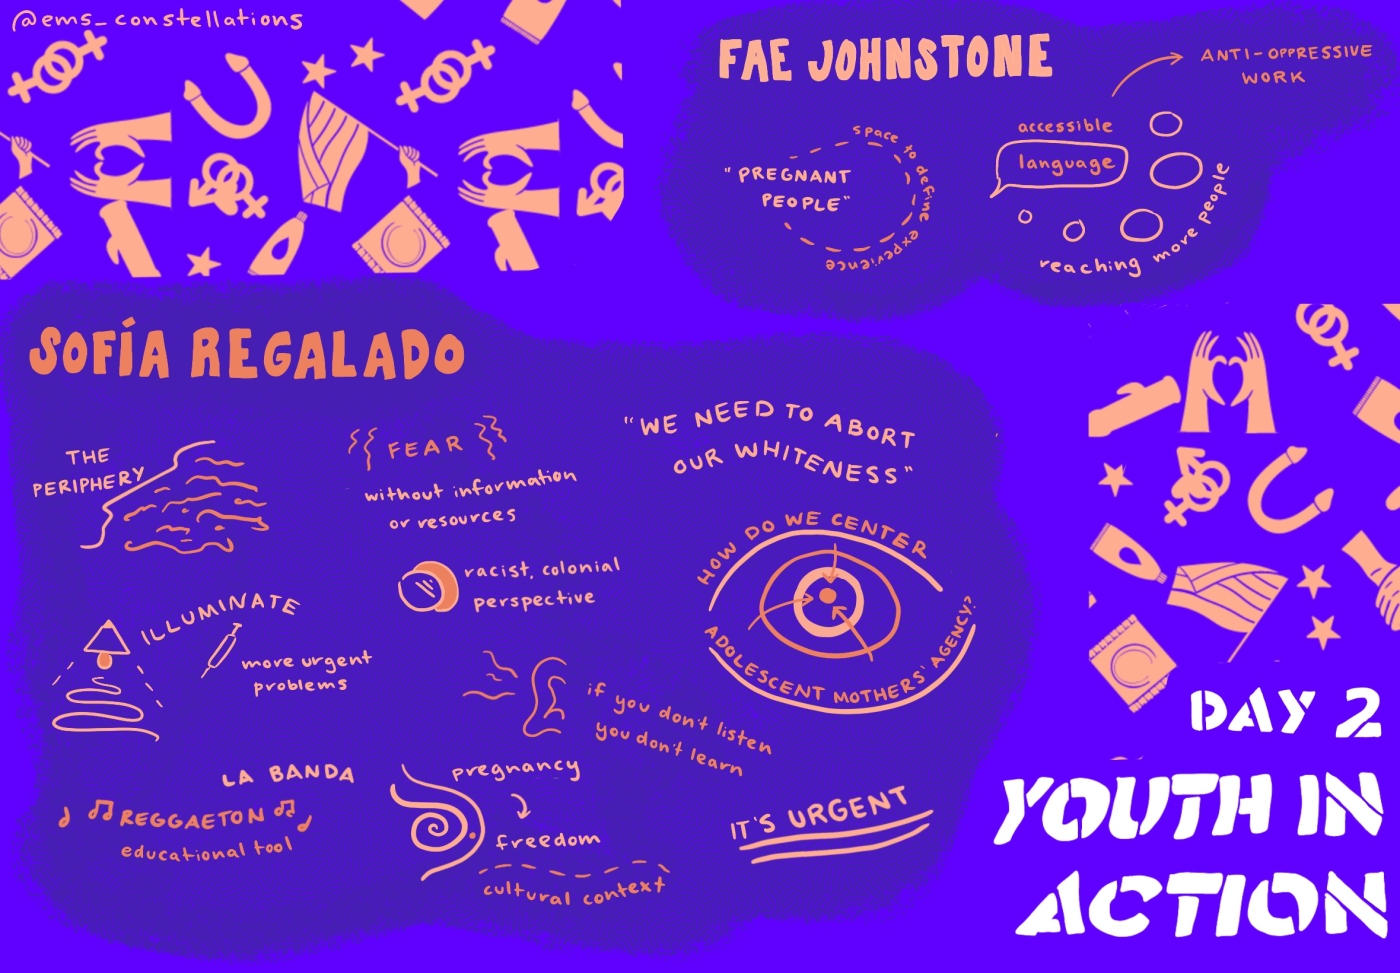 Visual brainstorm of Youth in Action Day 2 in purple and orange. Writing and doodles outline the concepts introduced by Fae Johnstone and Sofia Regalado, including anti-oppression, accessible language, cultural context, and colonialism in relation to SRHR.